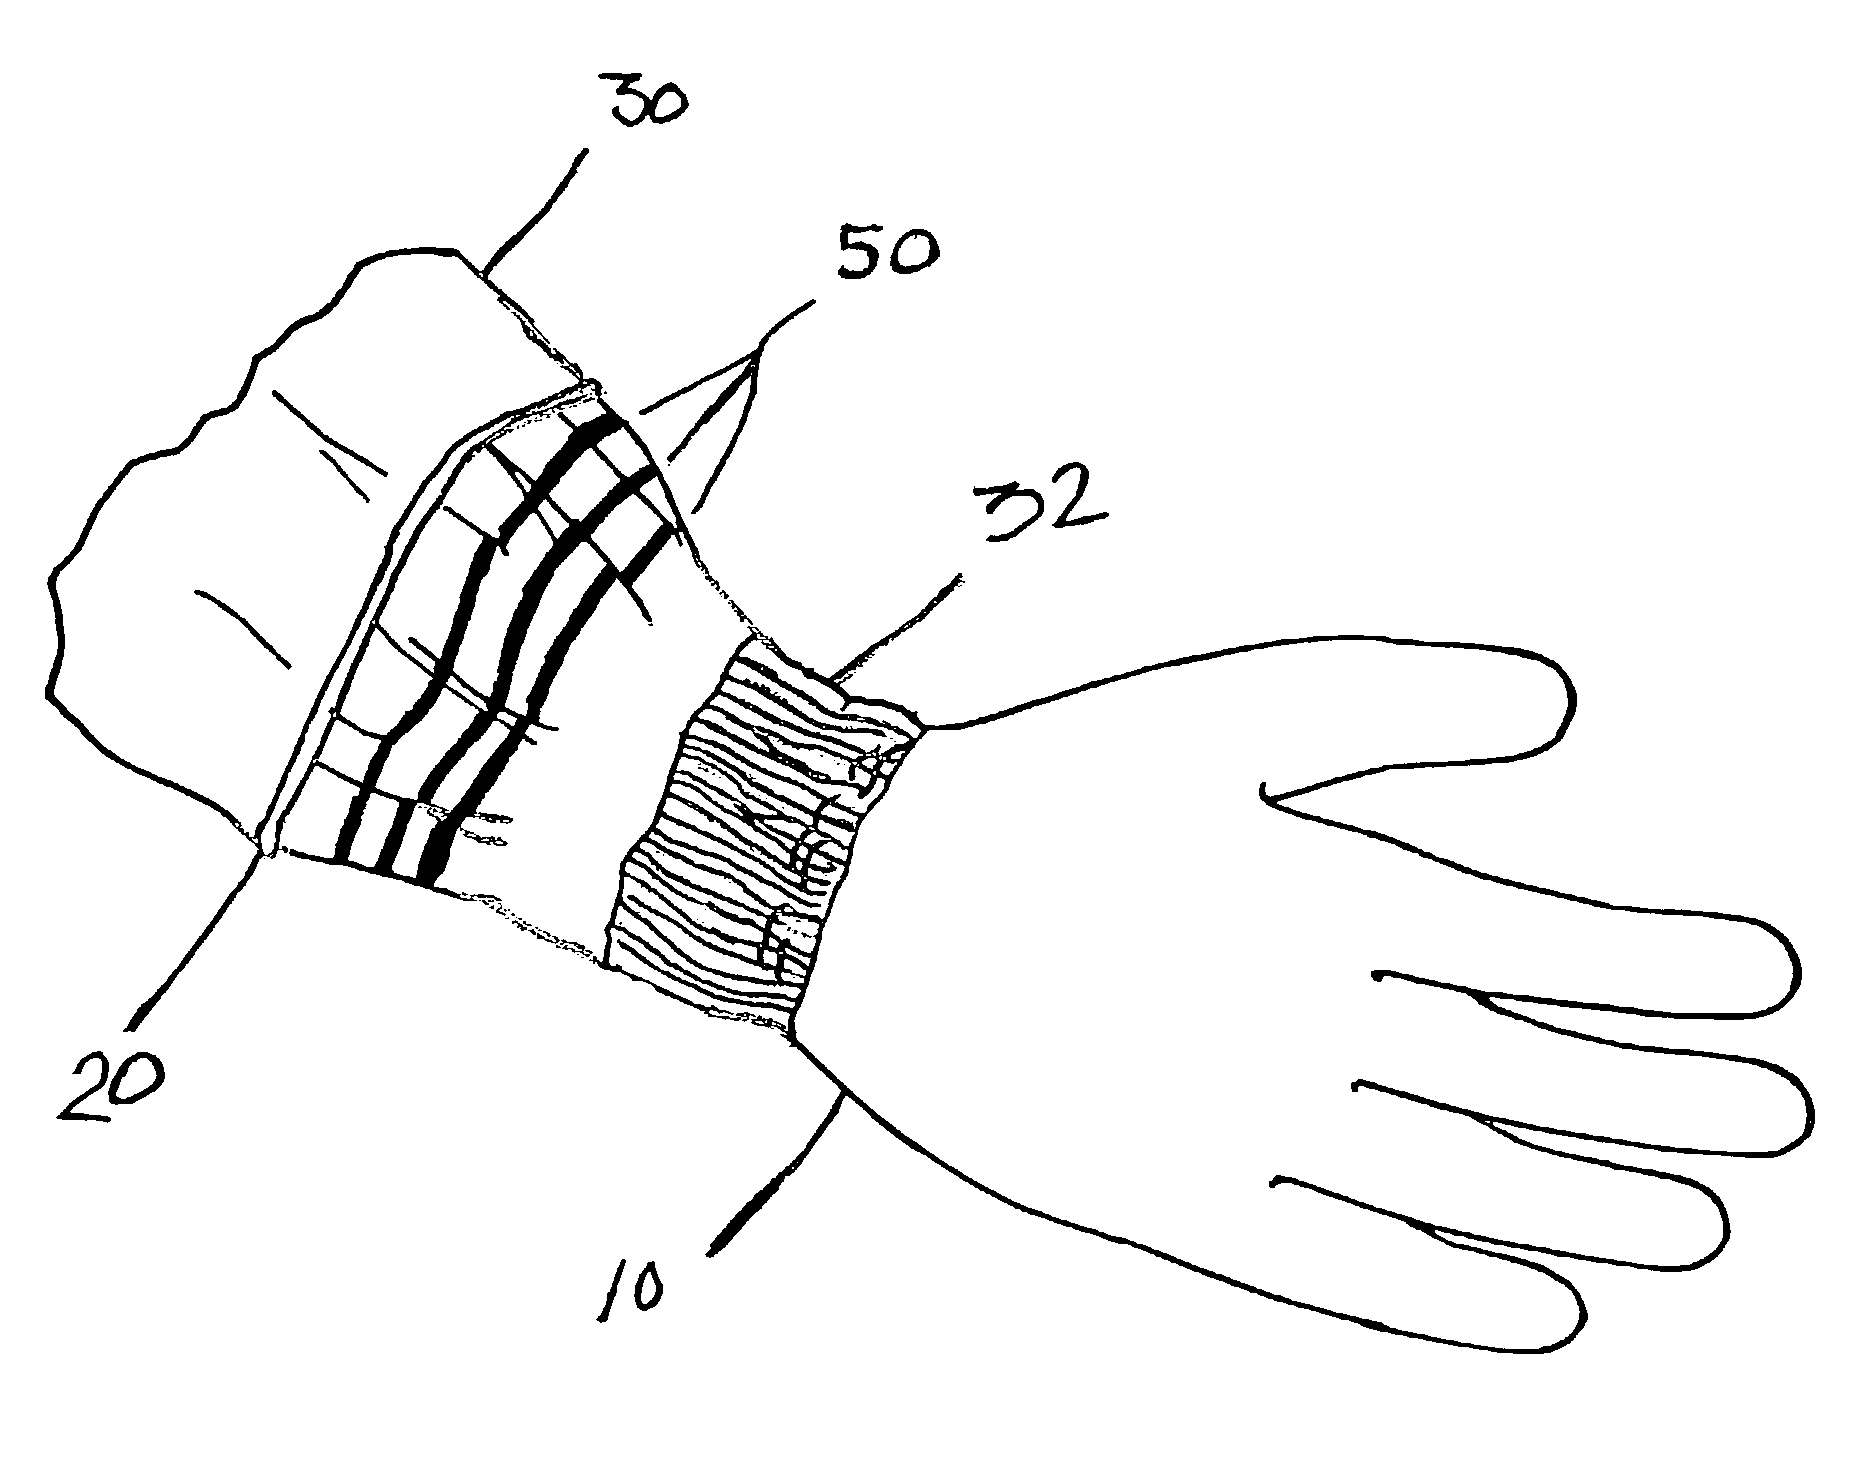 Anti-wicking protective workwear and methods of making and using same